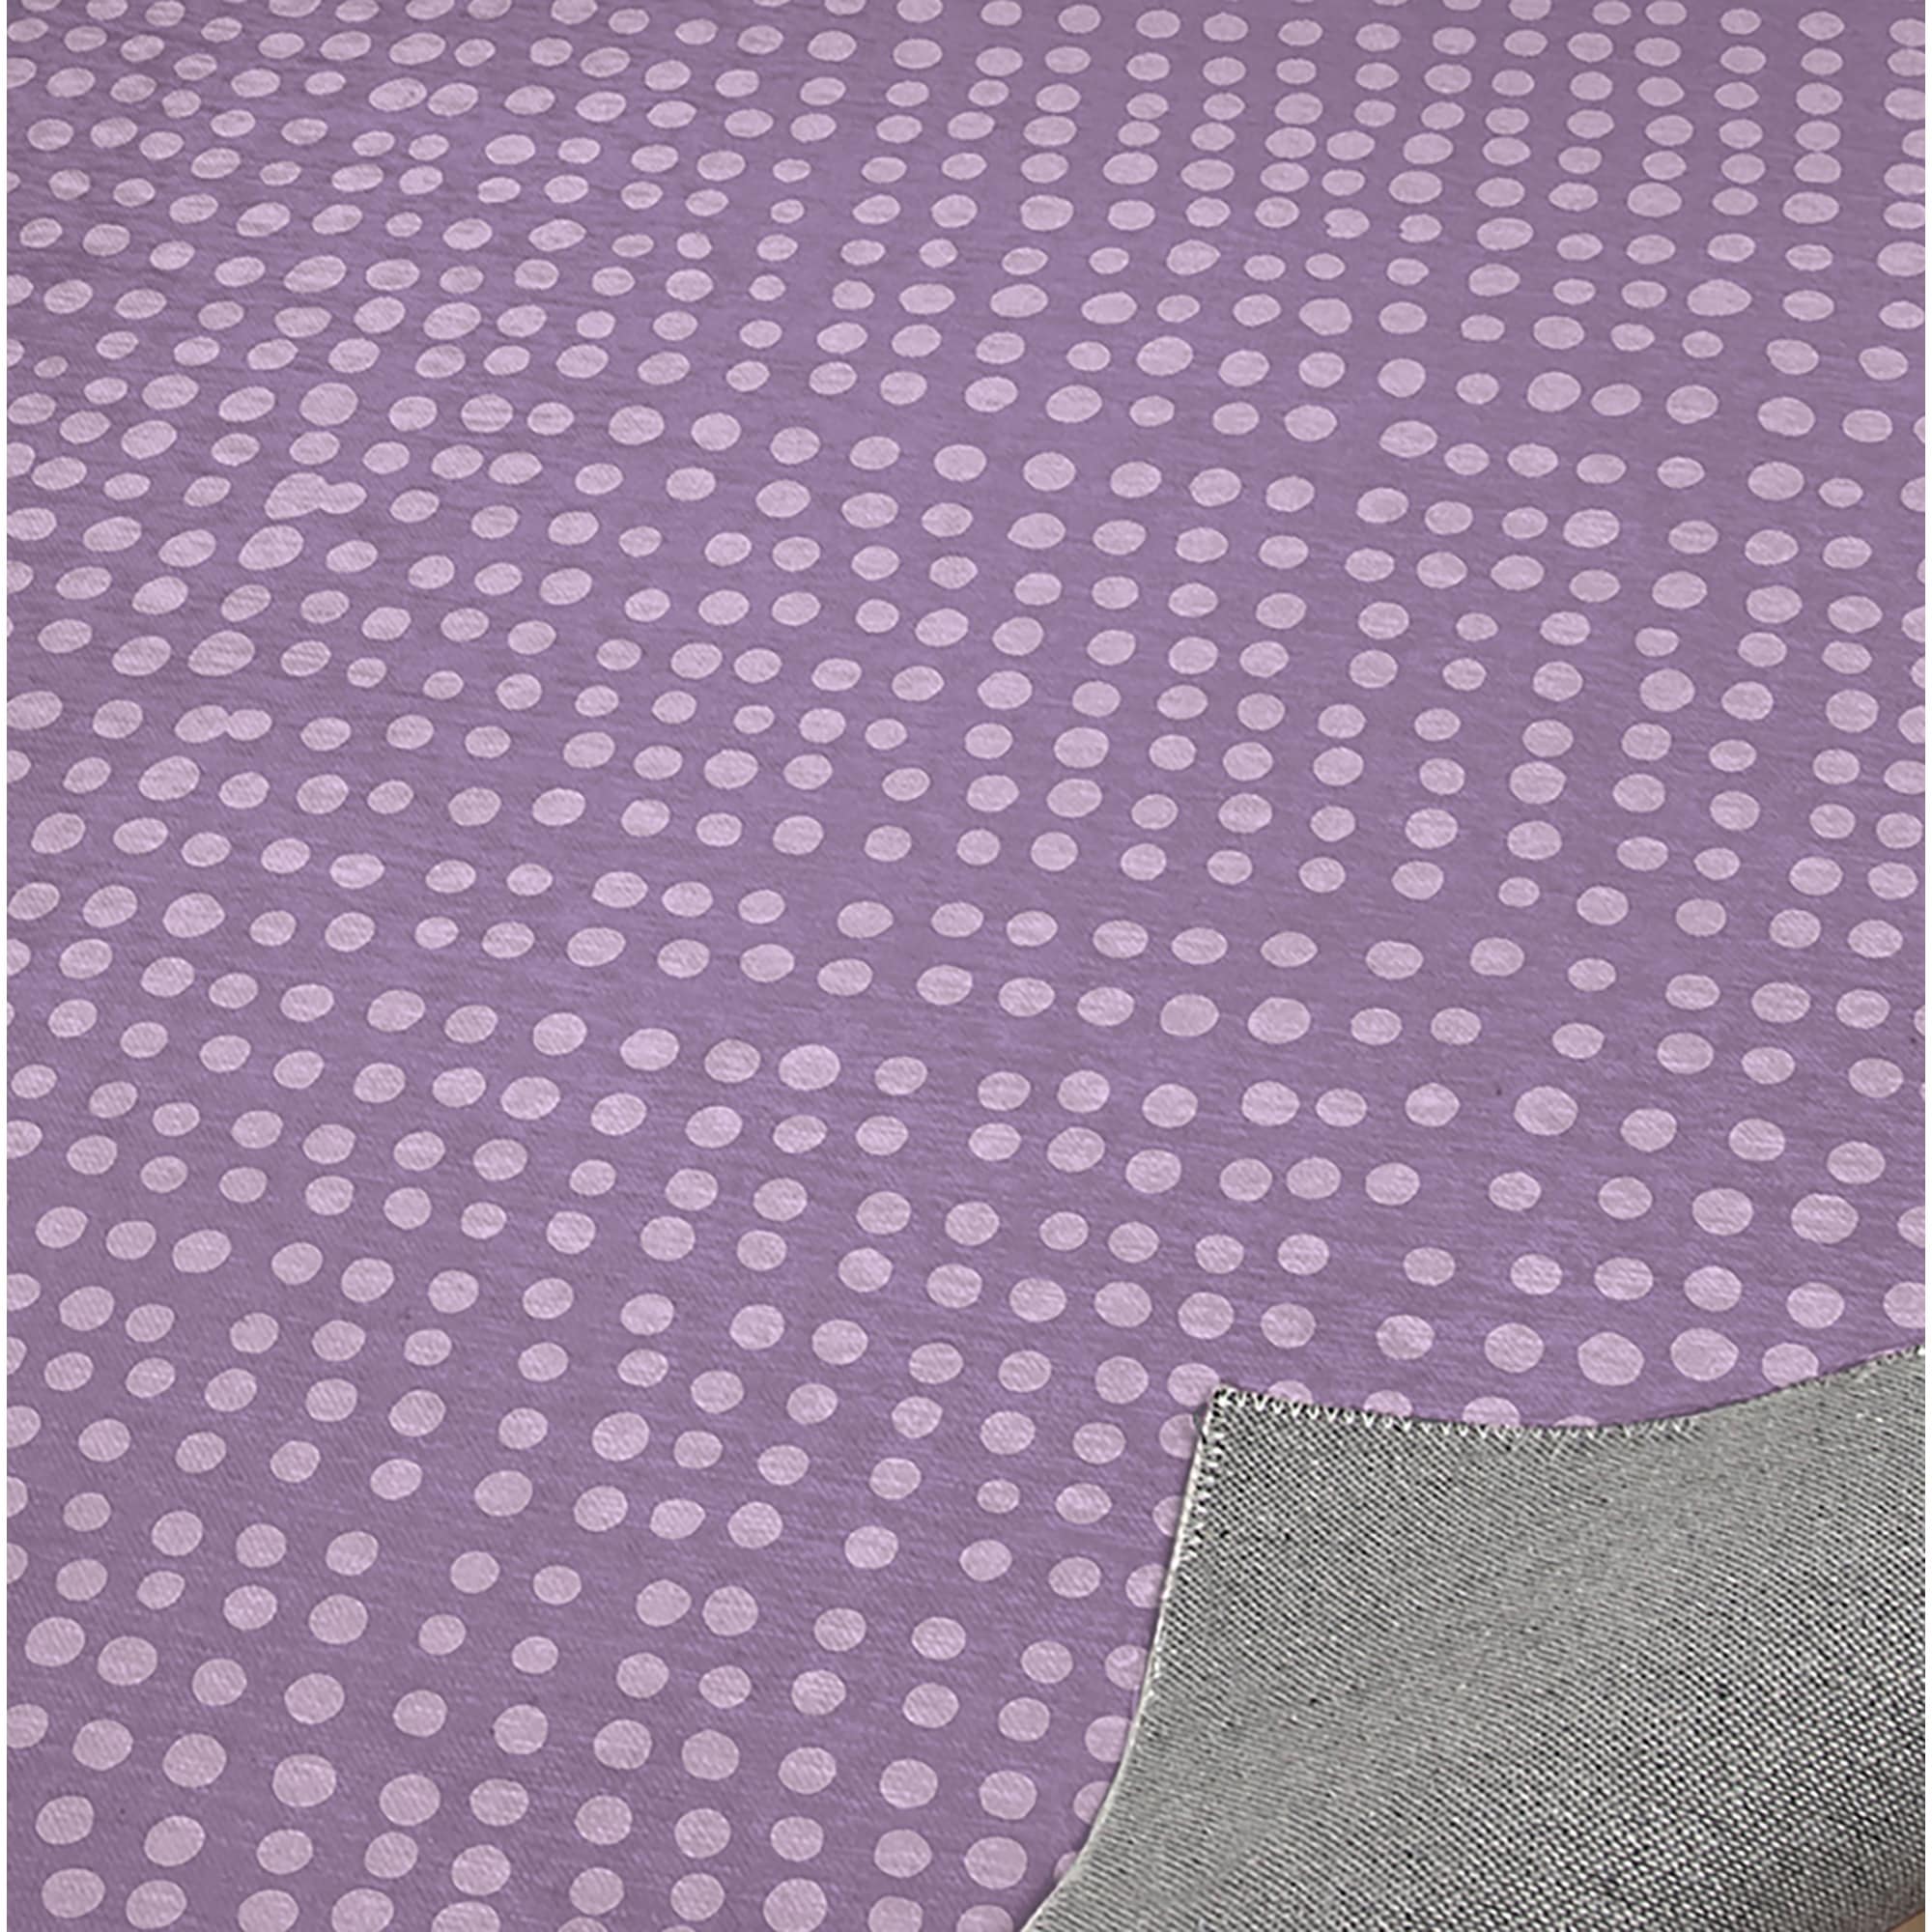 https://ak1.ostkcdn.com/images/products/is/images/direct/8593ba8d3d21bd64be6dd1eed25c455746b06881/DOTS-ABSTRACT-LAVENDER-Indoor-Door-Mat-By-Kavka-Designs.jpg